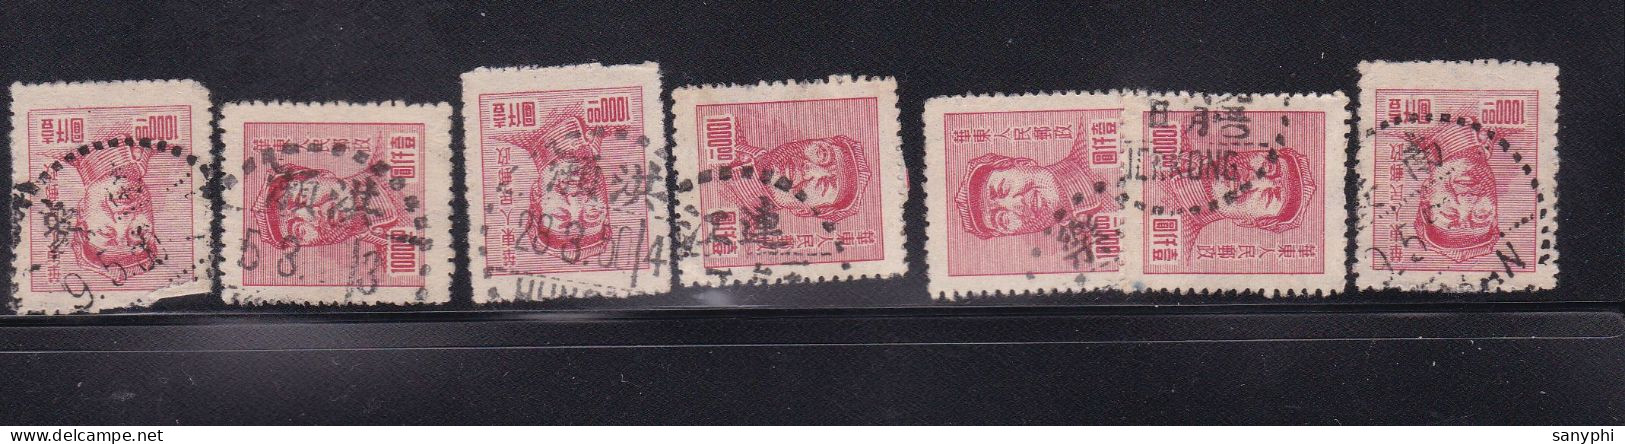 East China 1949 Mao 1000Yuan,7 Used Stamps - Neufs